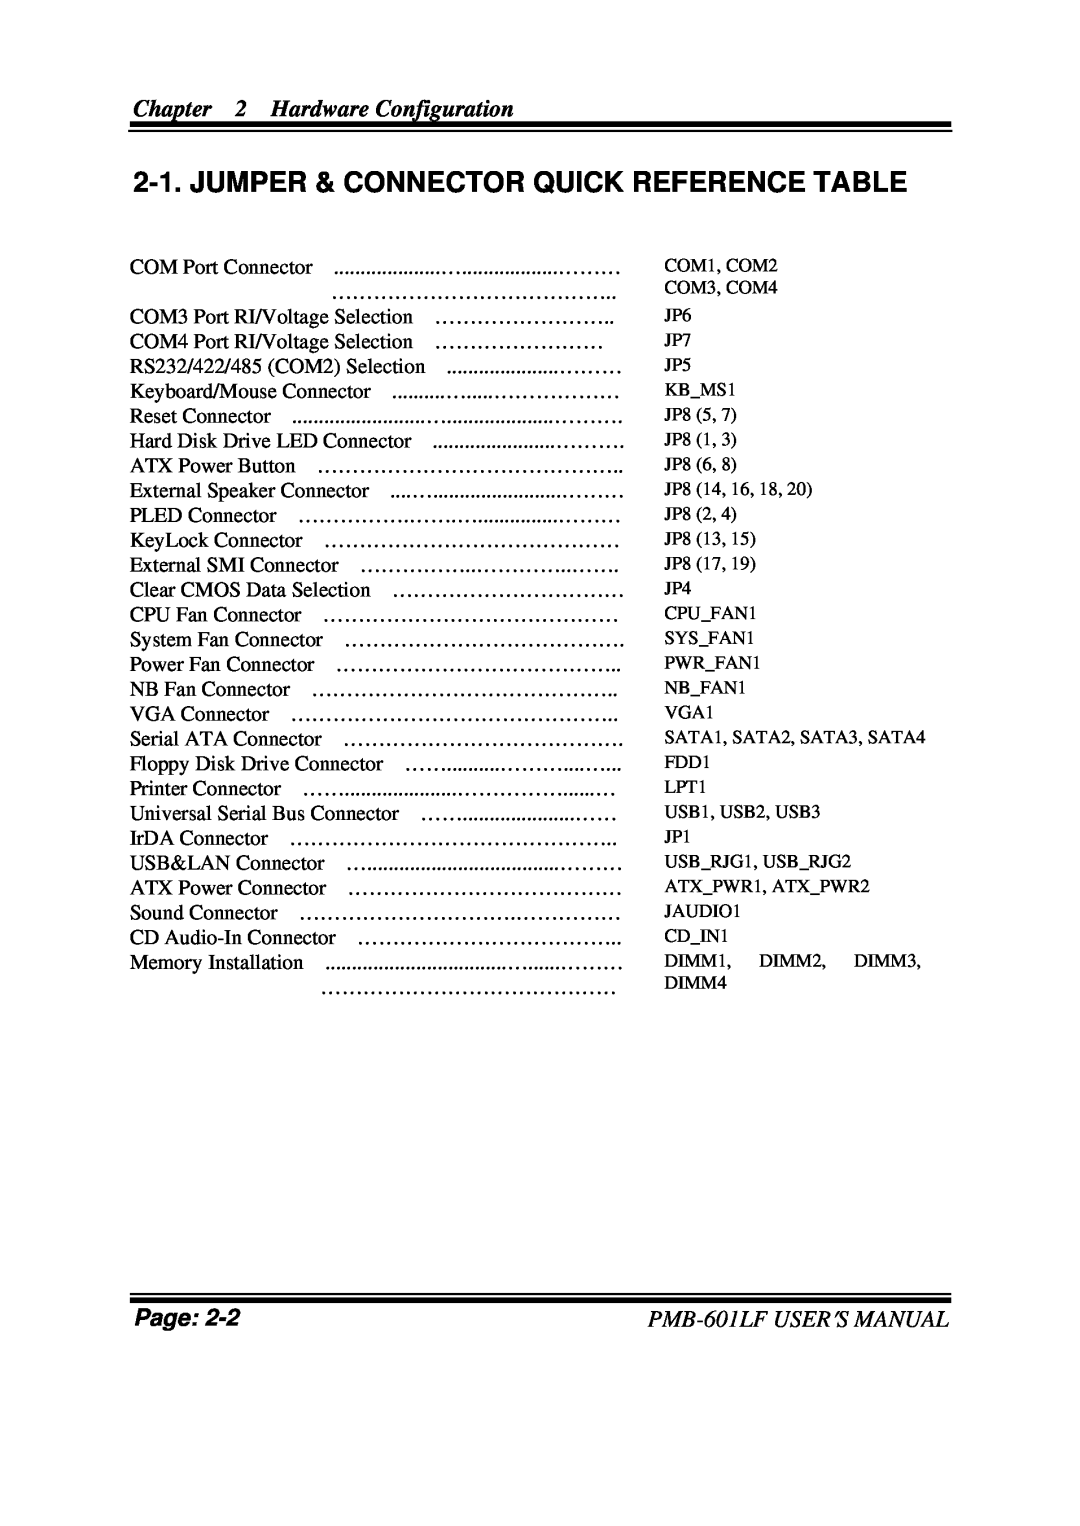 Intel user manual Jumper & Connector Quick Reference Table, Hardware Configuration, Page, PMB-601LFUSER′S MANUAL 